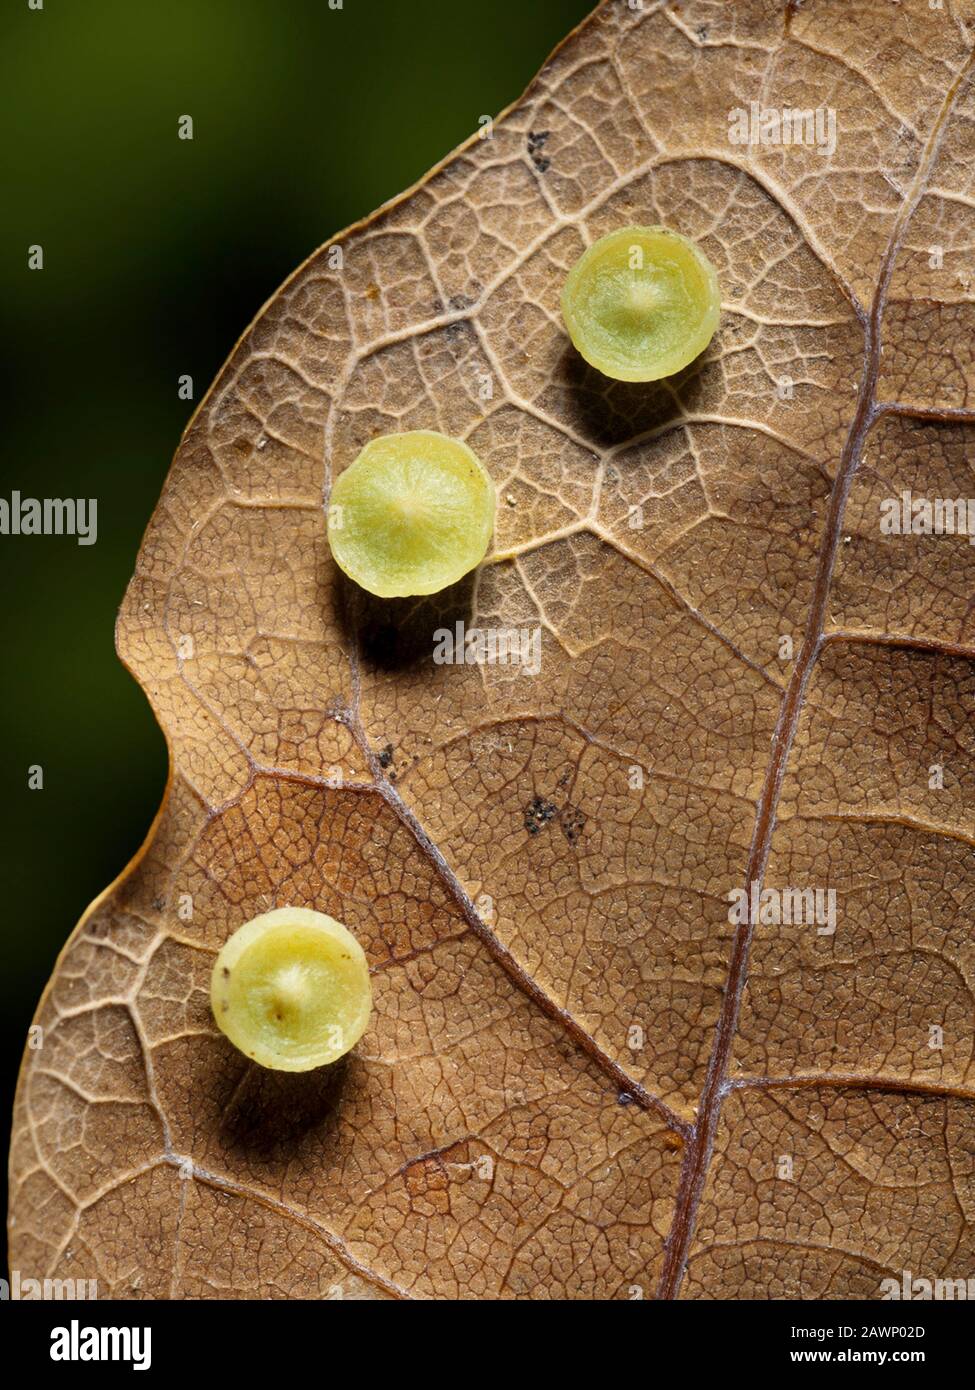 Smooth Spangle galls, Neuroterus albipes, growing on Oak leaf, the galls are caused by the wasp Neuroterus albipes Stock Photo